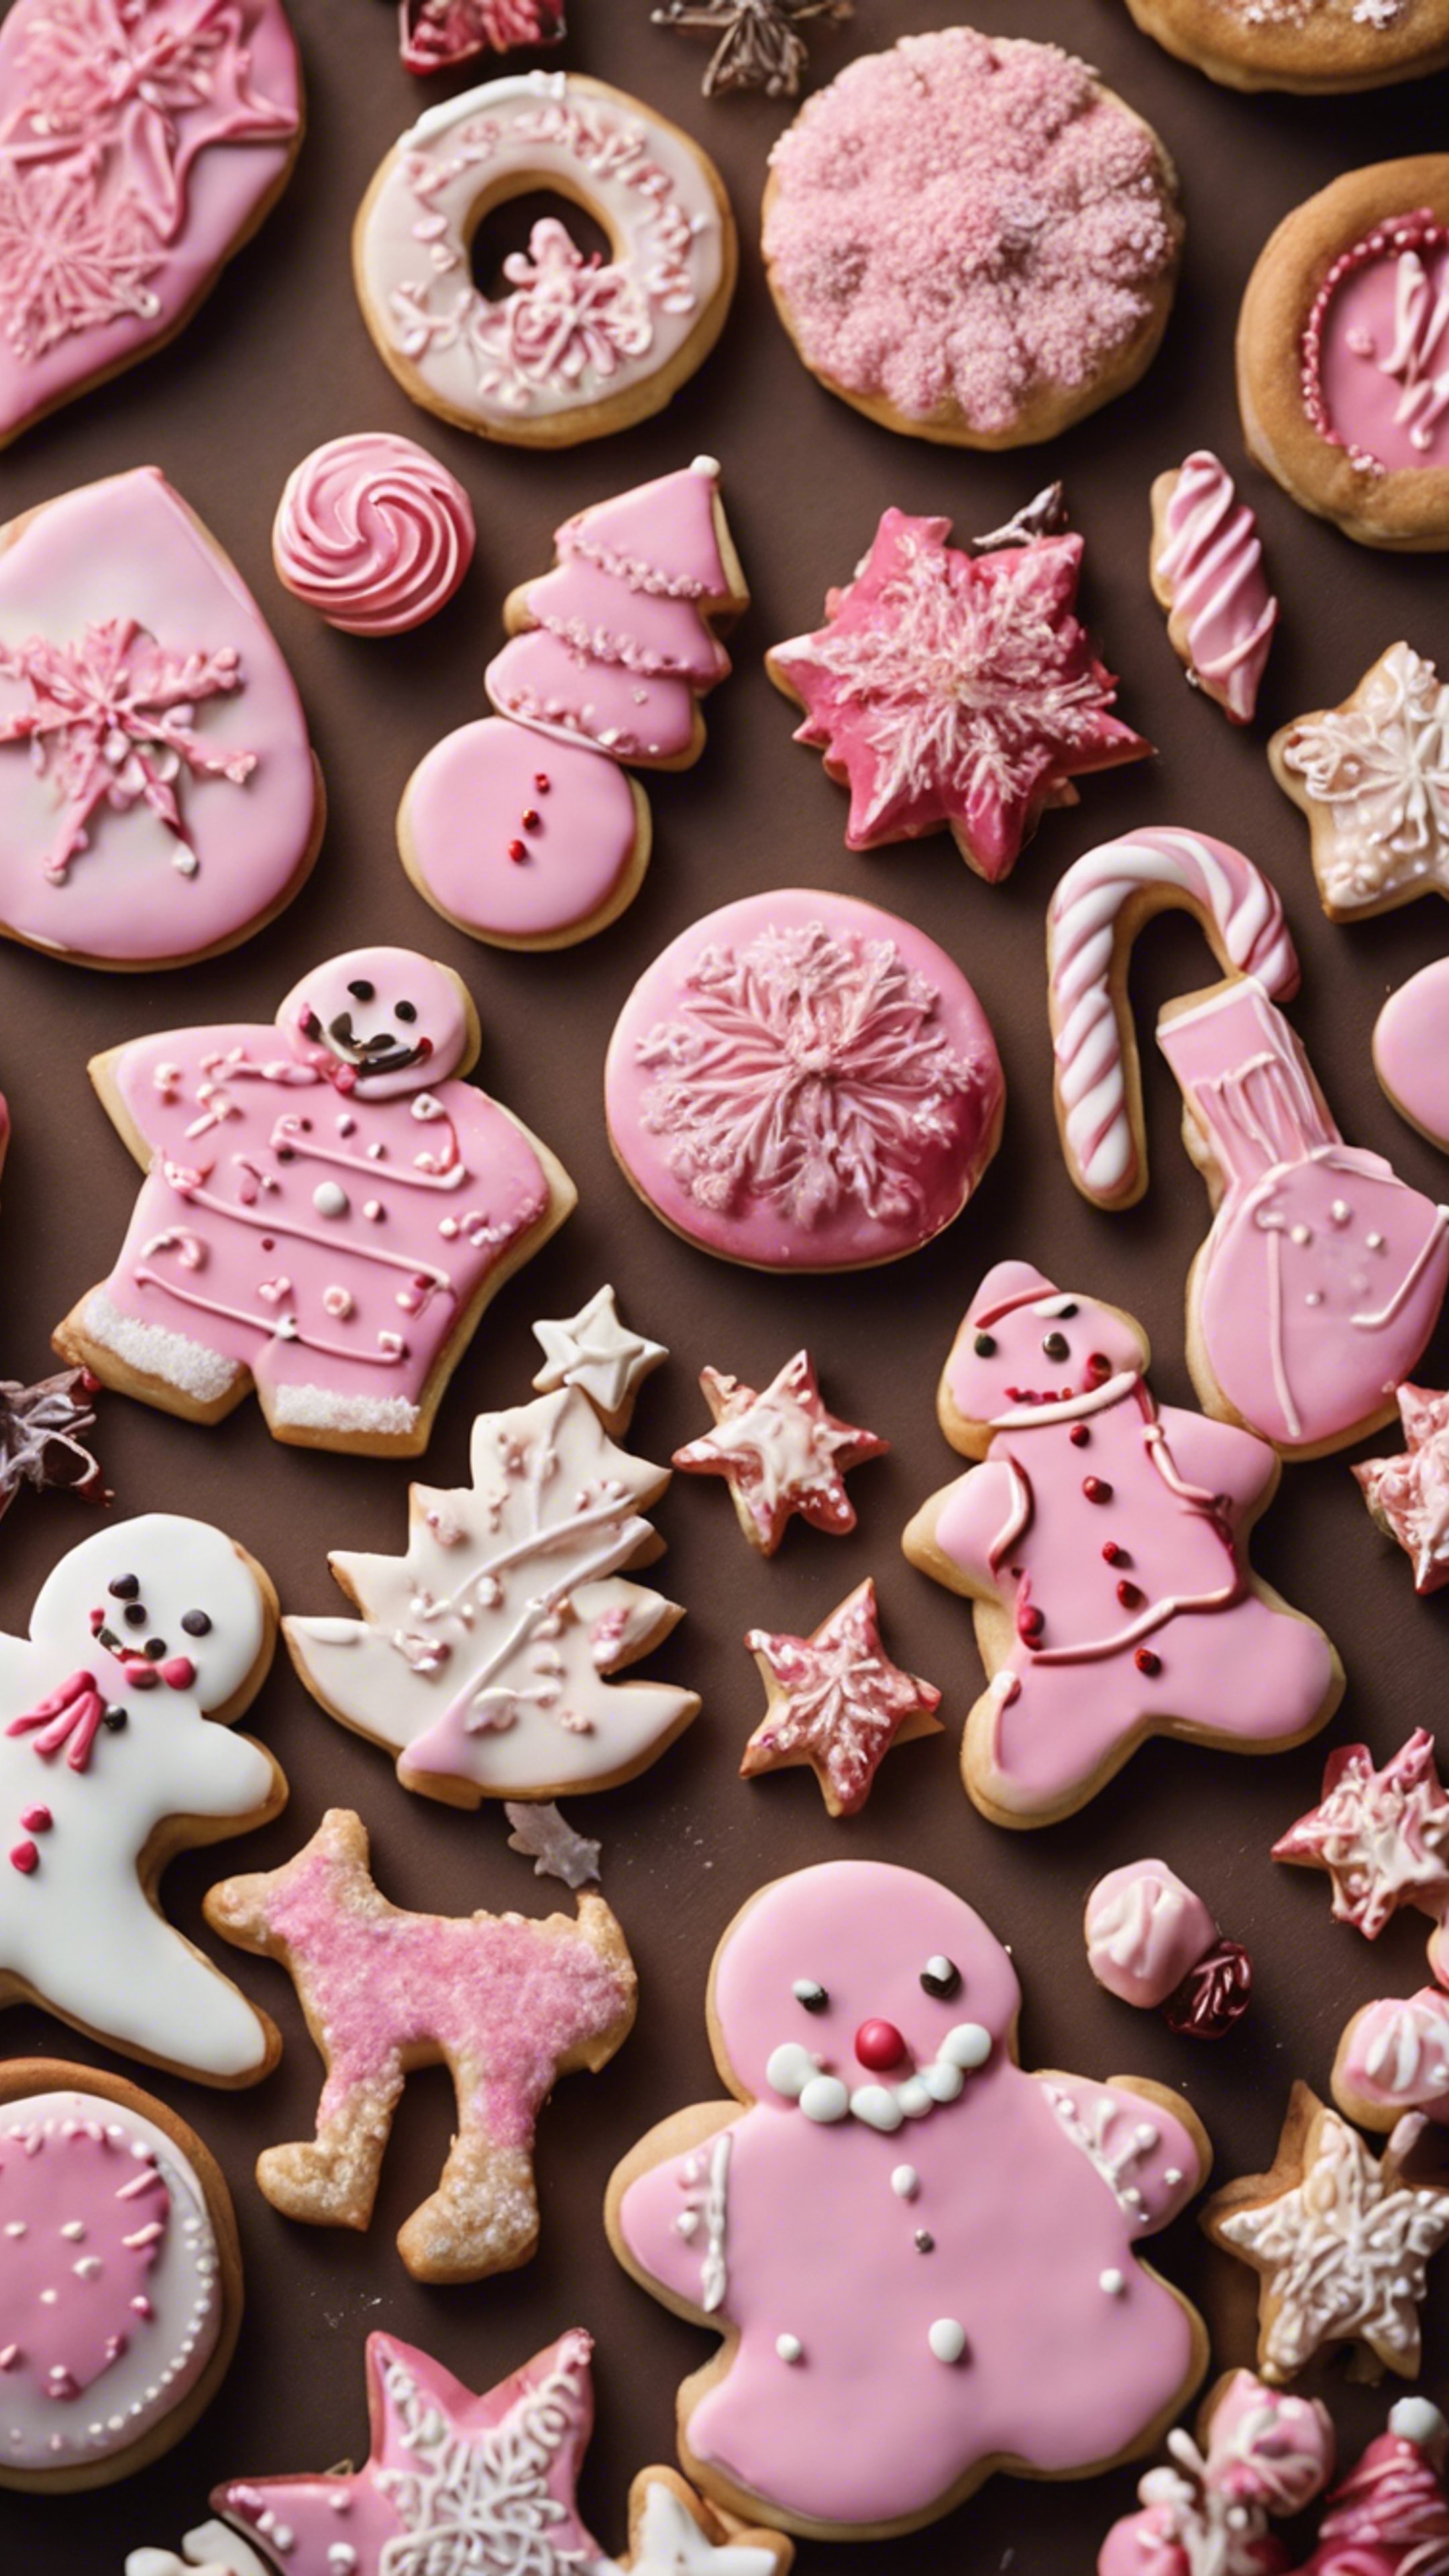 Various types of pink Christmas cookies and sweets laid on a table with festive decorations. Taustakuva[bb72647e6a9944a5b5aa]